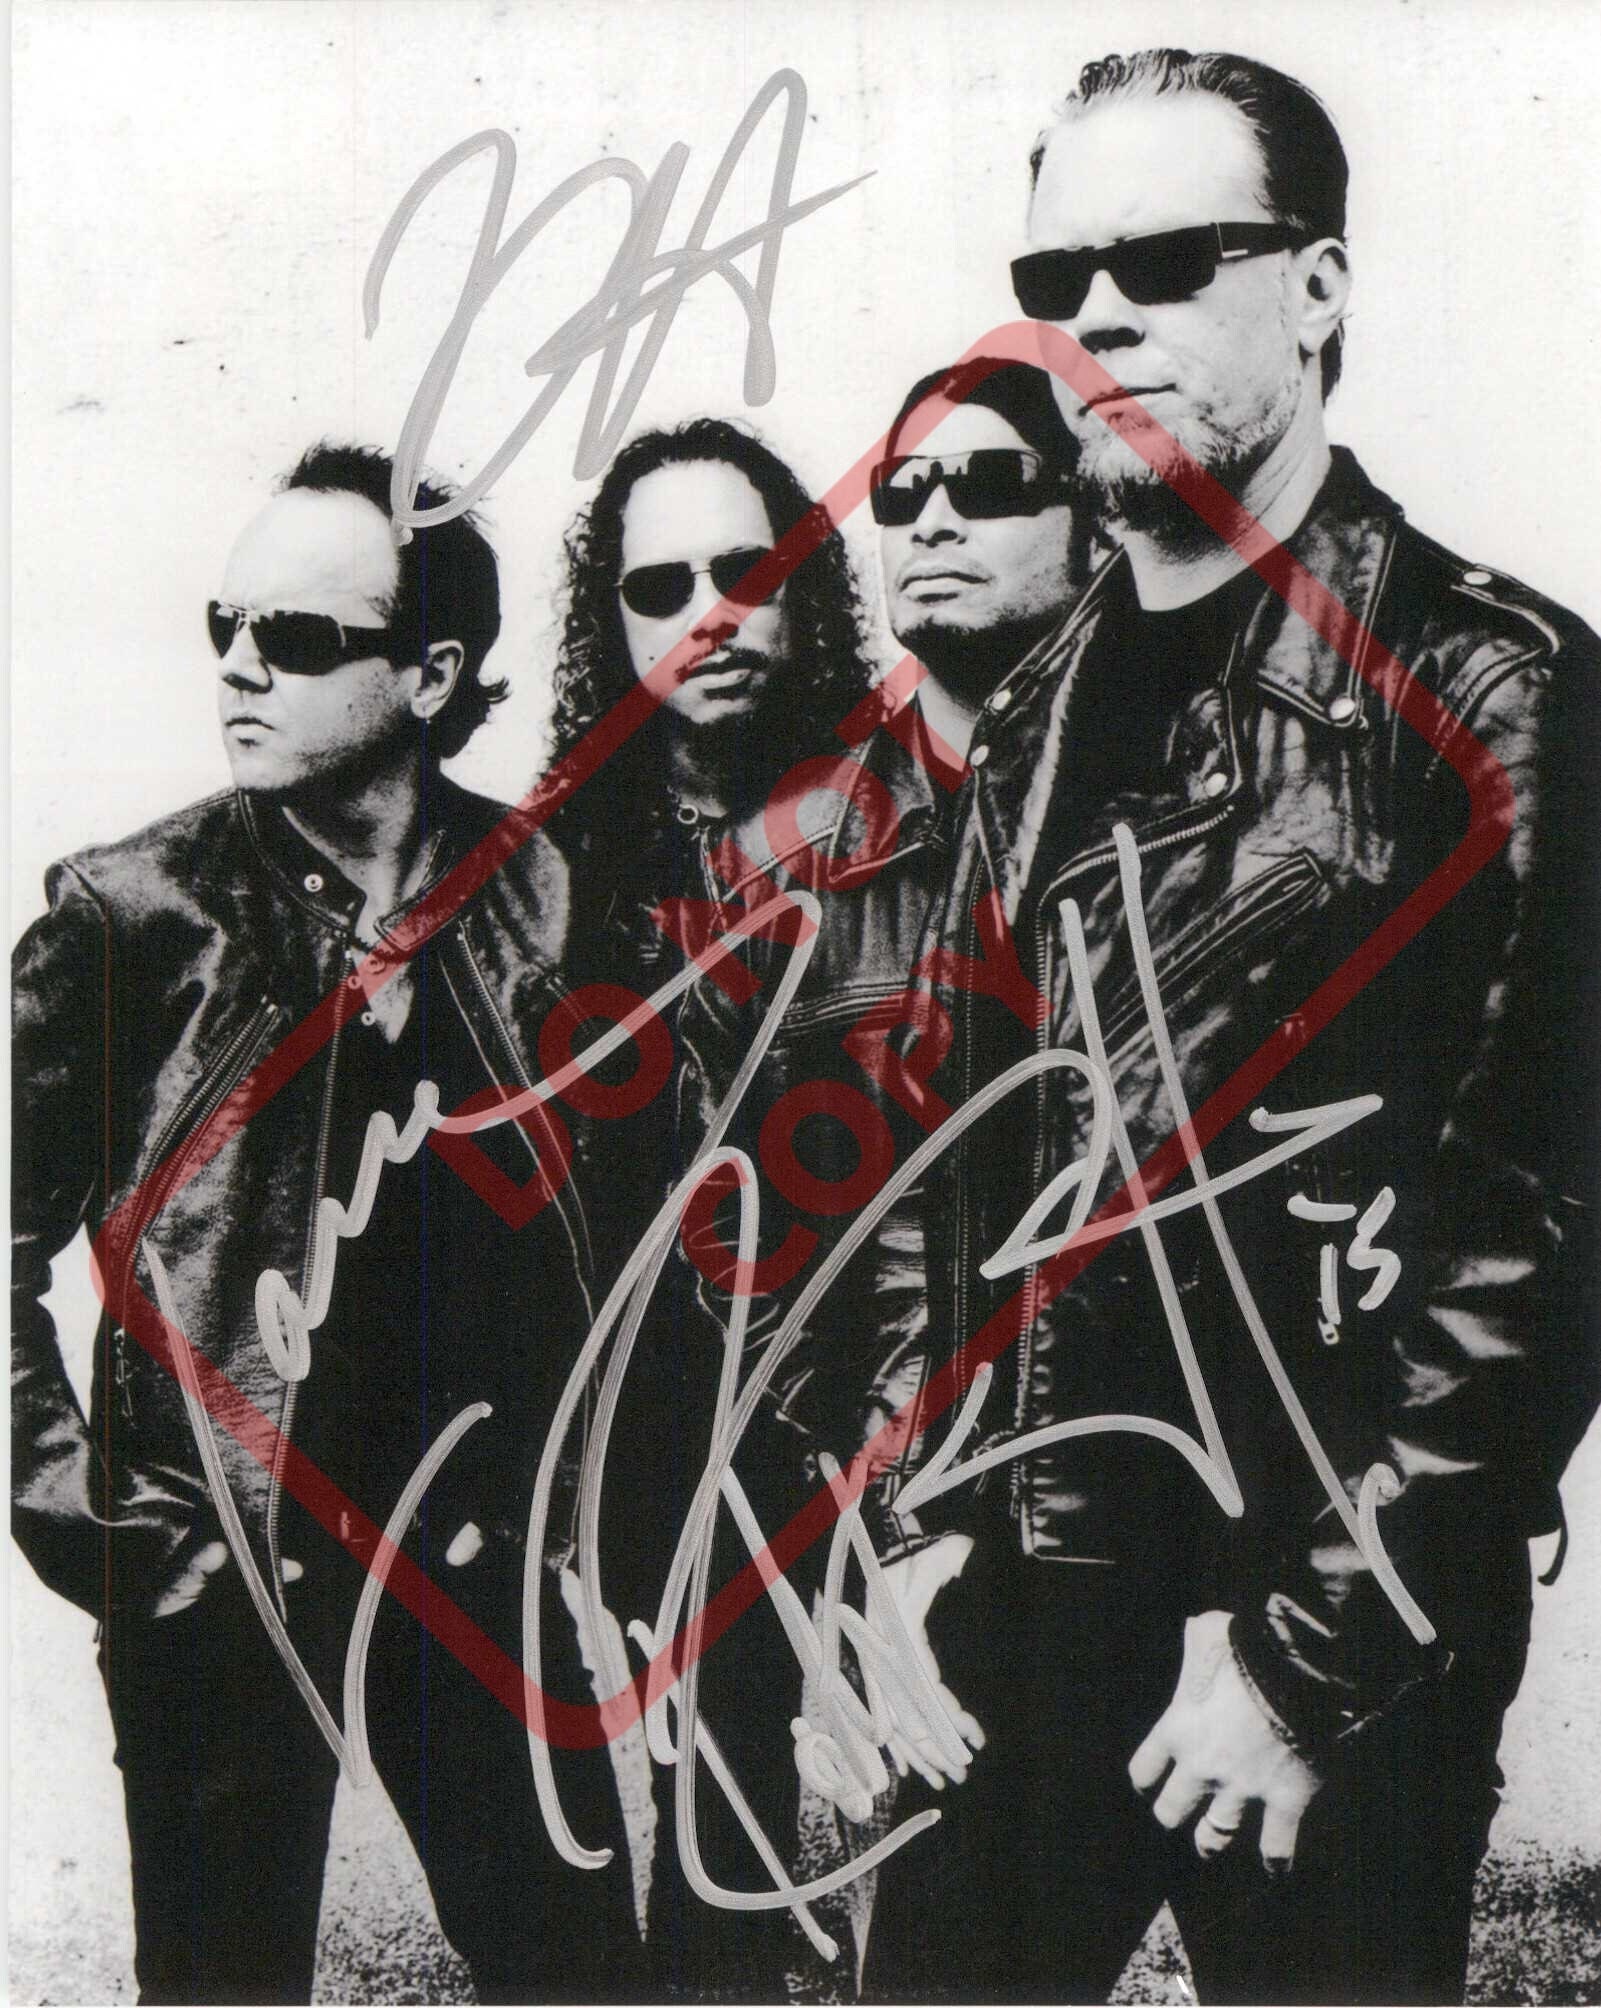 8.5x11 Autographed Signed Reprint RP Photo Aaliyah 